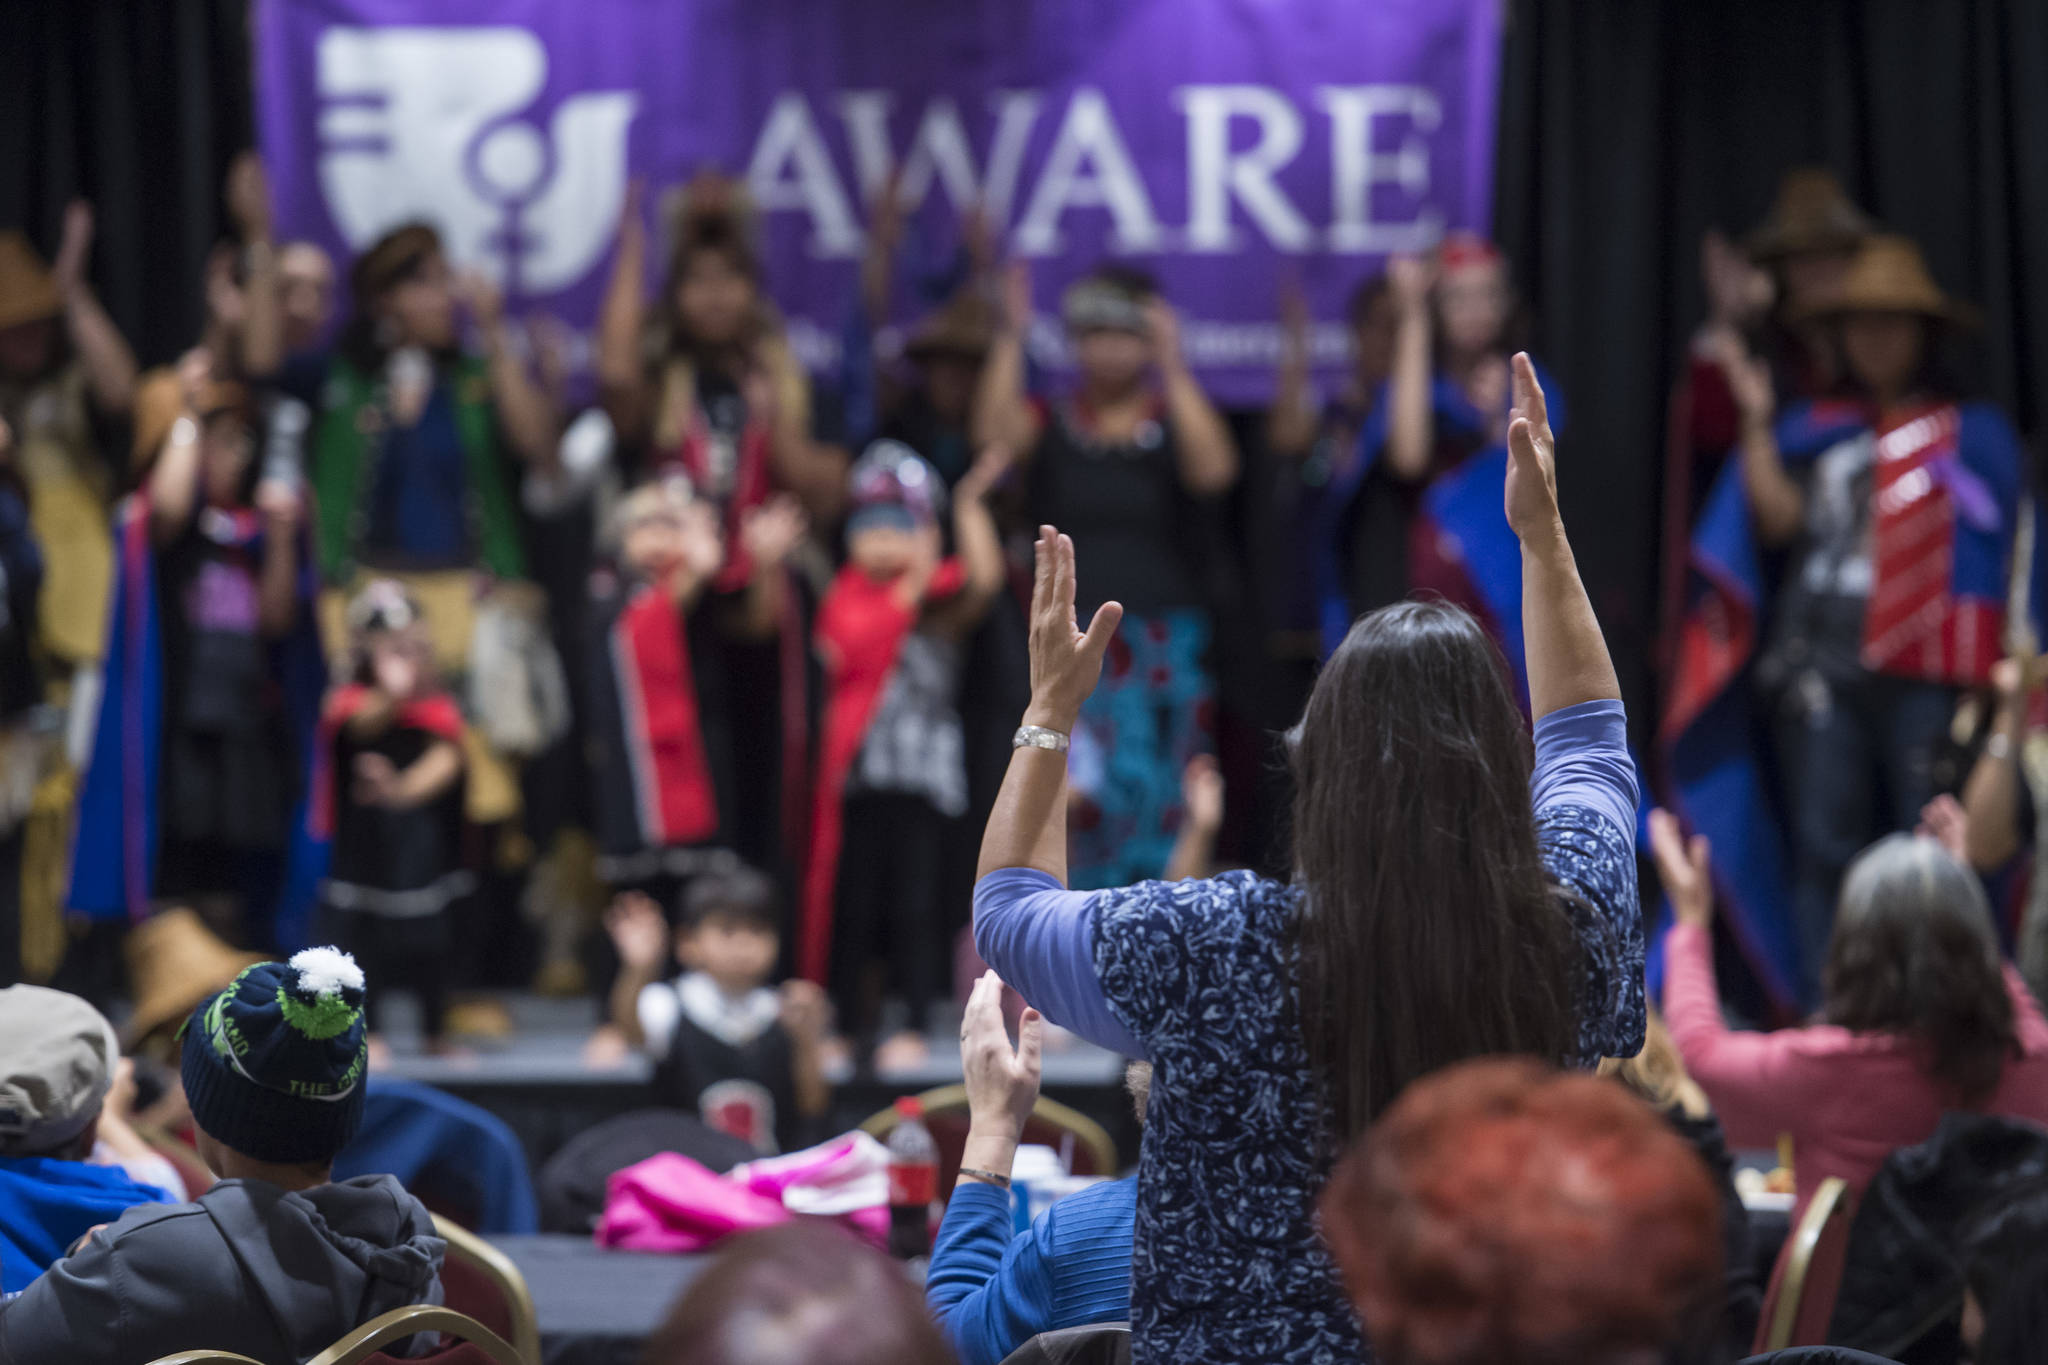 People pay tribute to the Woosh.ji.een Dance Group as they perform during a Celebrate Survivors gathering sponsored by Central Council Tlingit and Haida Indian Tribes of Alaska and AWARE in the Elizabeth Peratrovich Hall in 2018. (Michael Penn | Juneau Empire File)